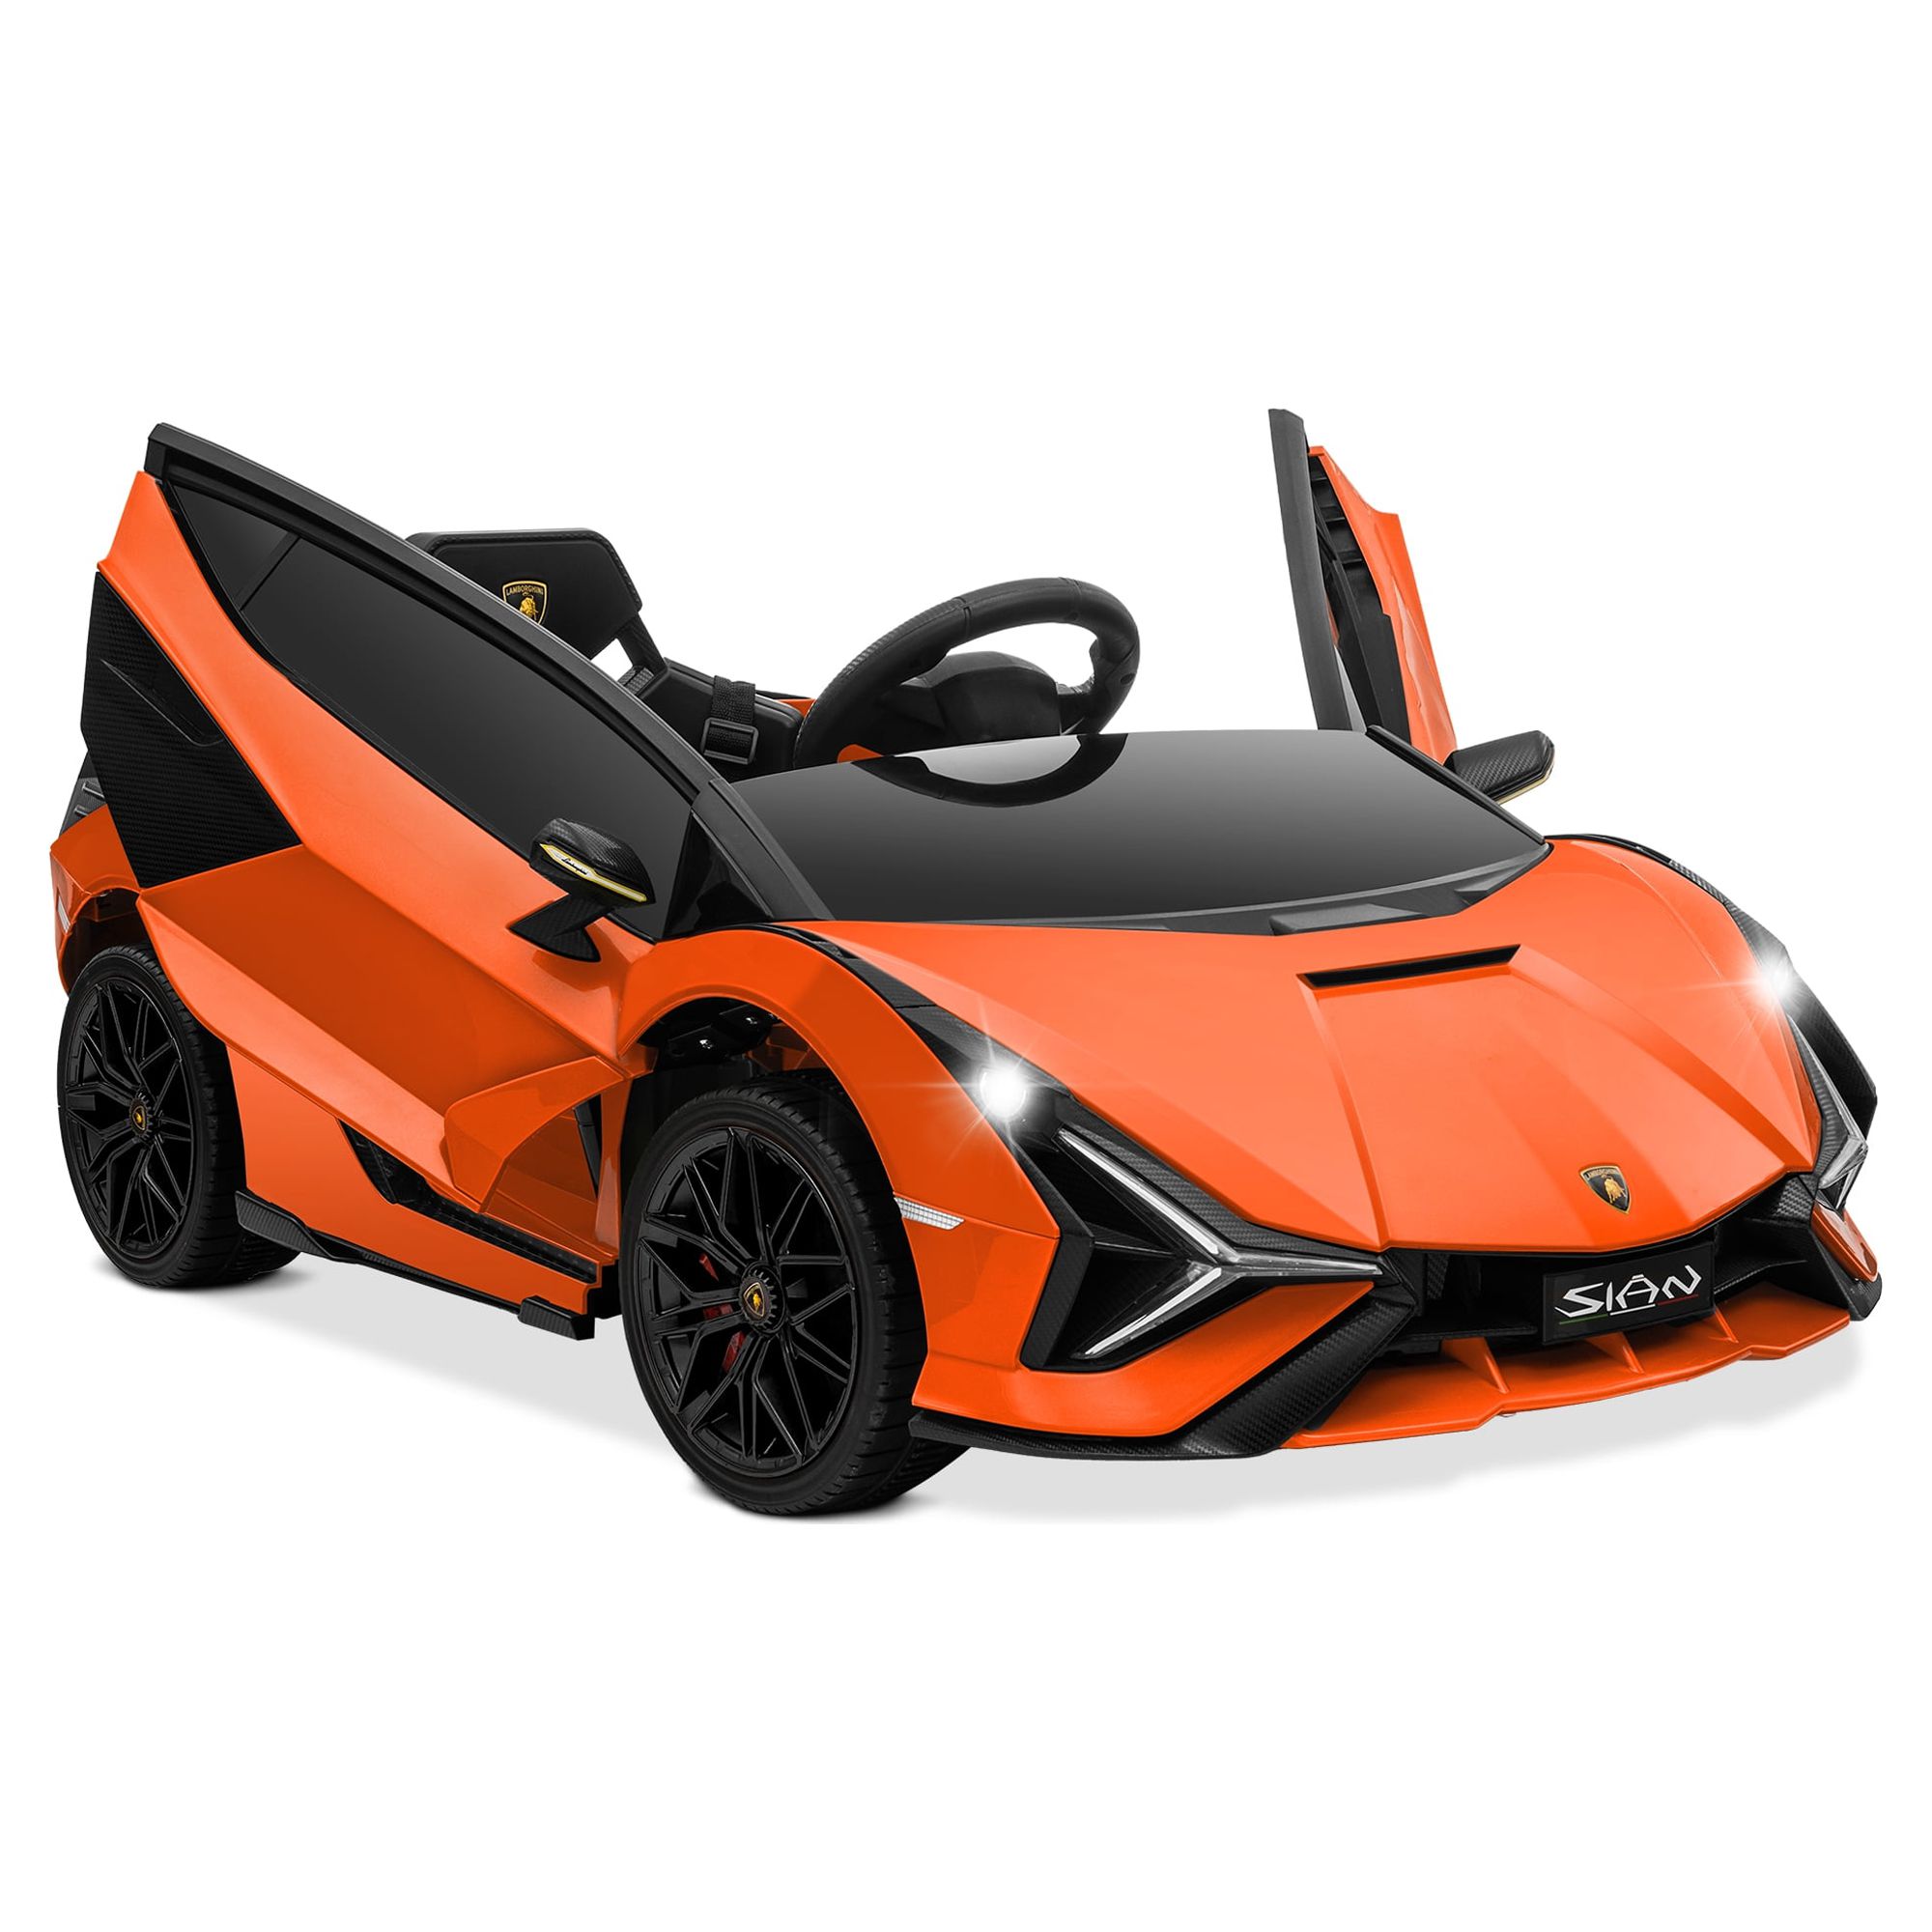 Kidzone Kids 12V Electric Ride On Licensed Lamborghini Sian Roadster Motorized Sport Vehicle With 2 Speed, Remote Control, Wheels Suspension, LED lights, USB/Bluetooth Music, Engine Sounds, Orange - image 1 of 6